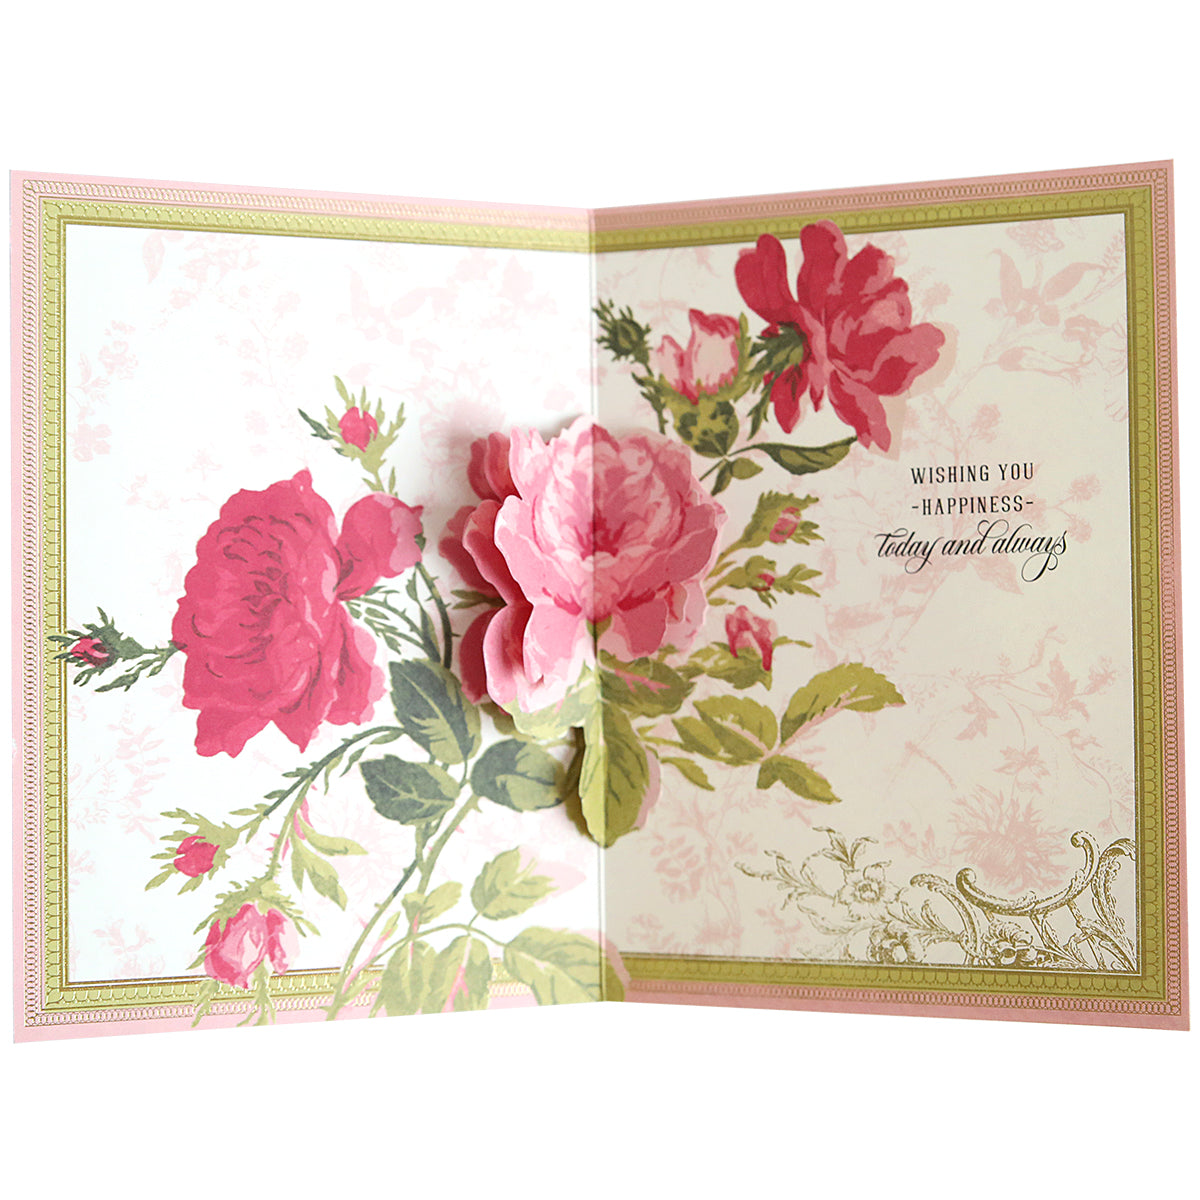 Greeting card open to a page with pink and red roses, ornamental designs, and the words "wishing you happiness today and always" in a script font from the Folded Flower Birthday Card Kit.